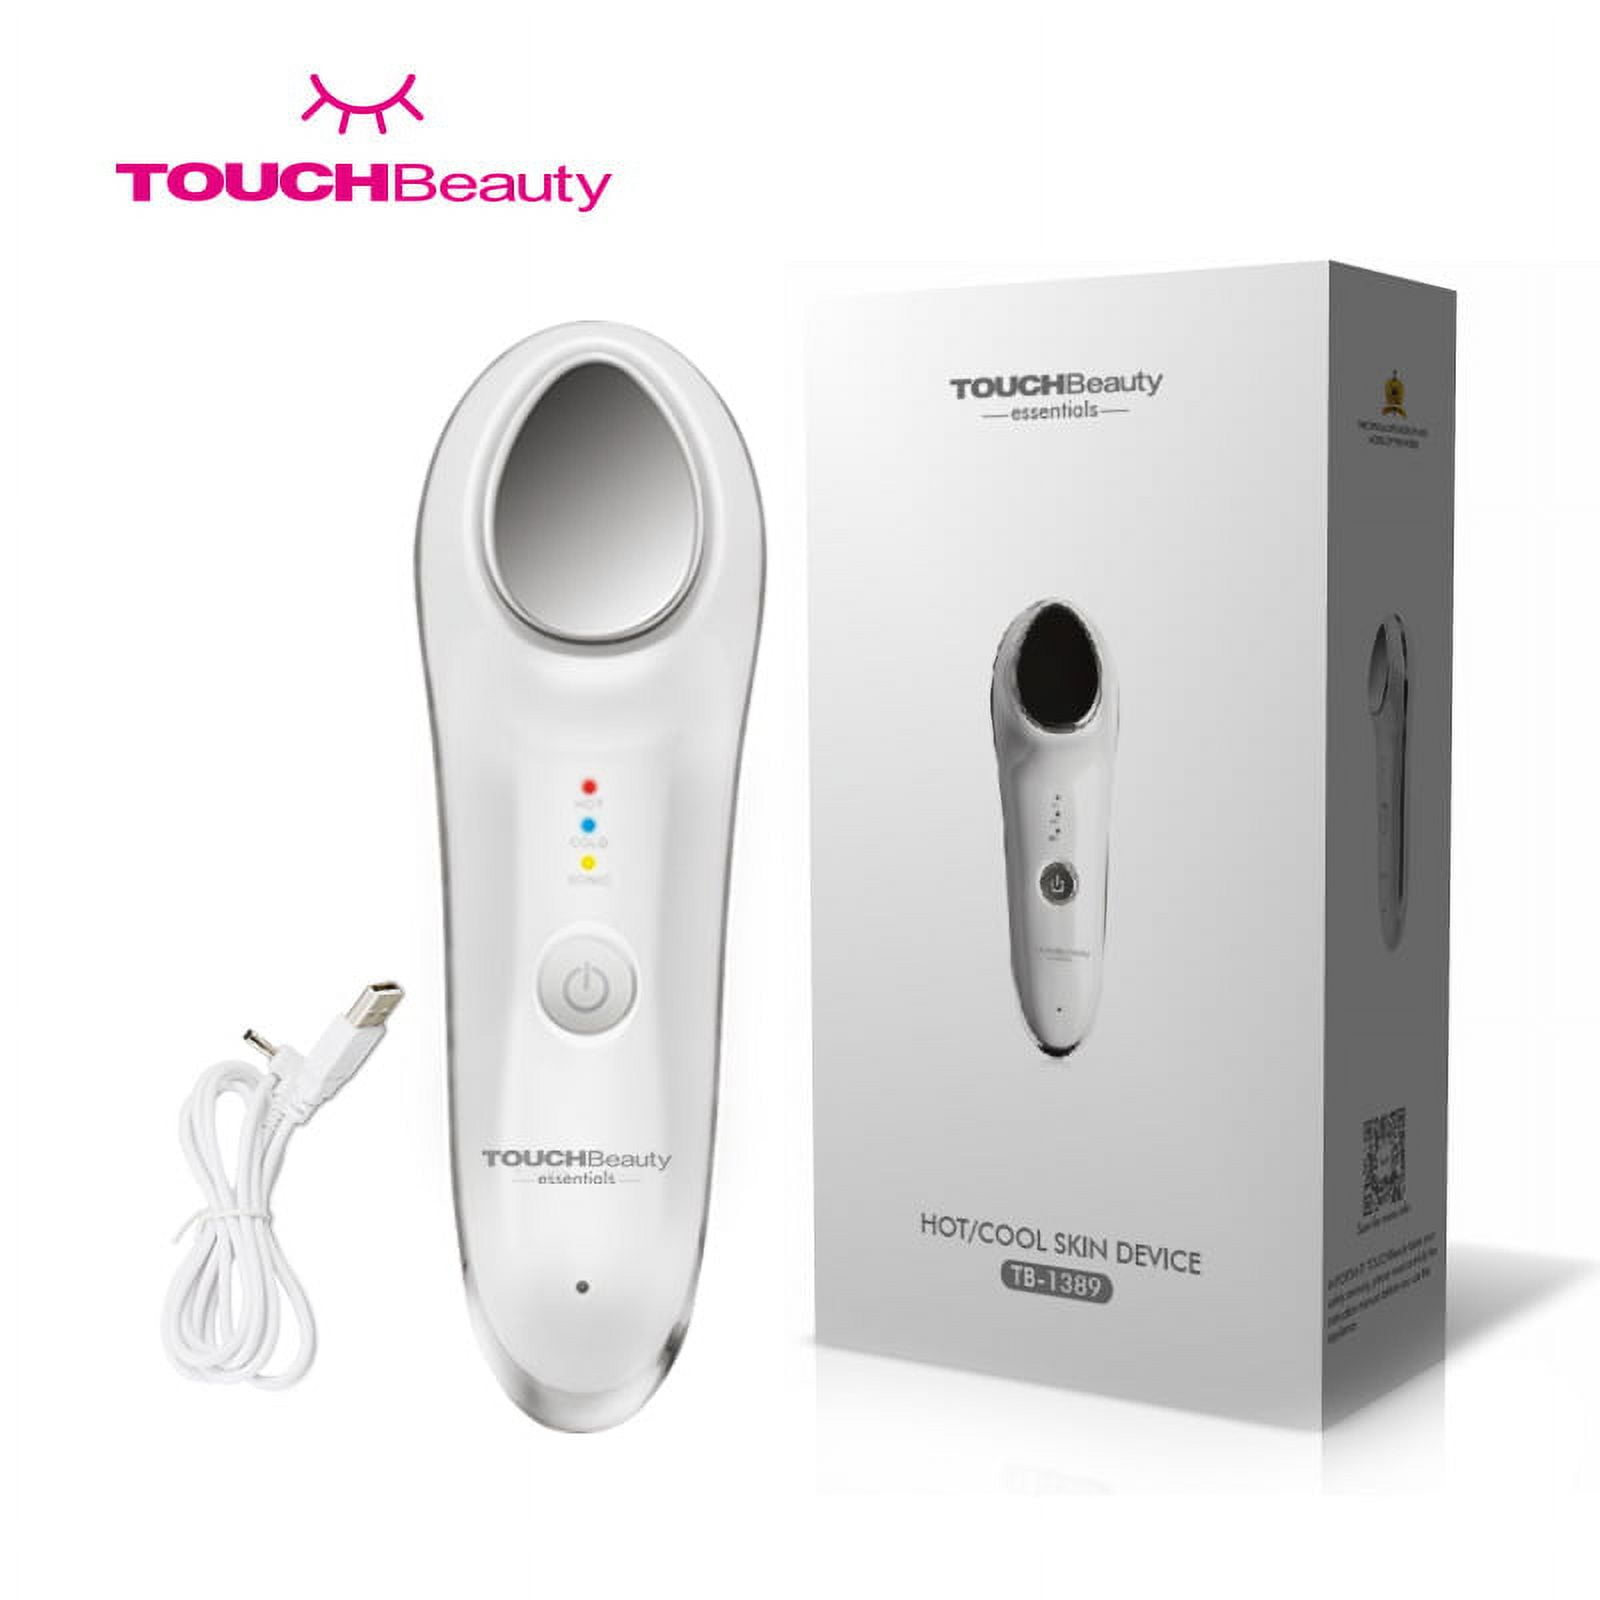 Elegant Home Massager TB-1389 Hot & Cool Beauty Touch Fashions